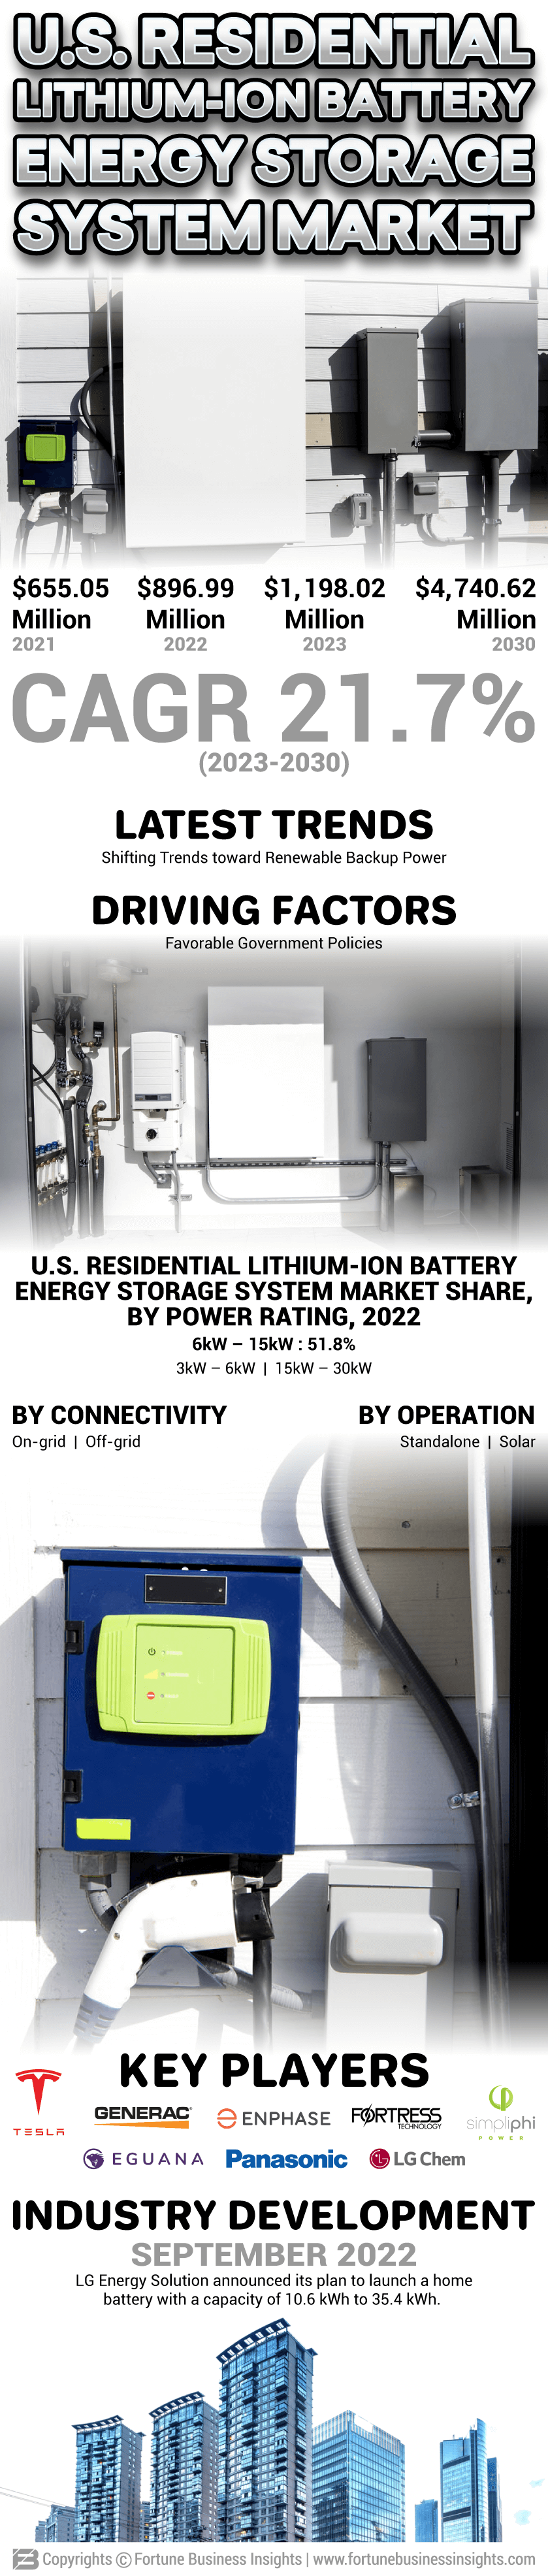 U.S. Residential Lithium-ion Battery Energy Storage System Market